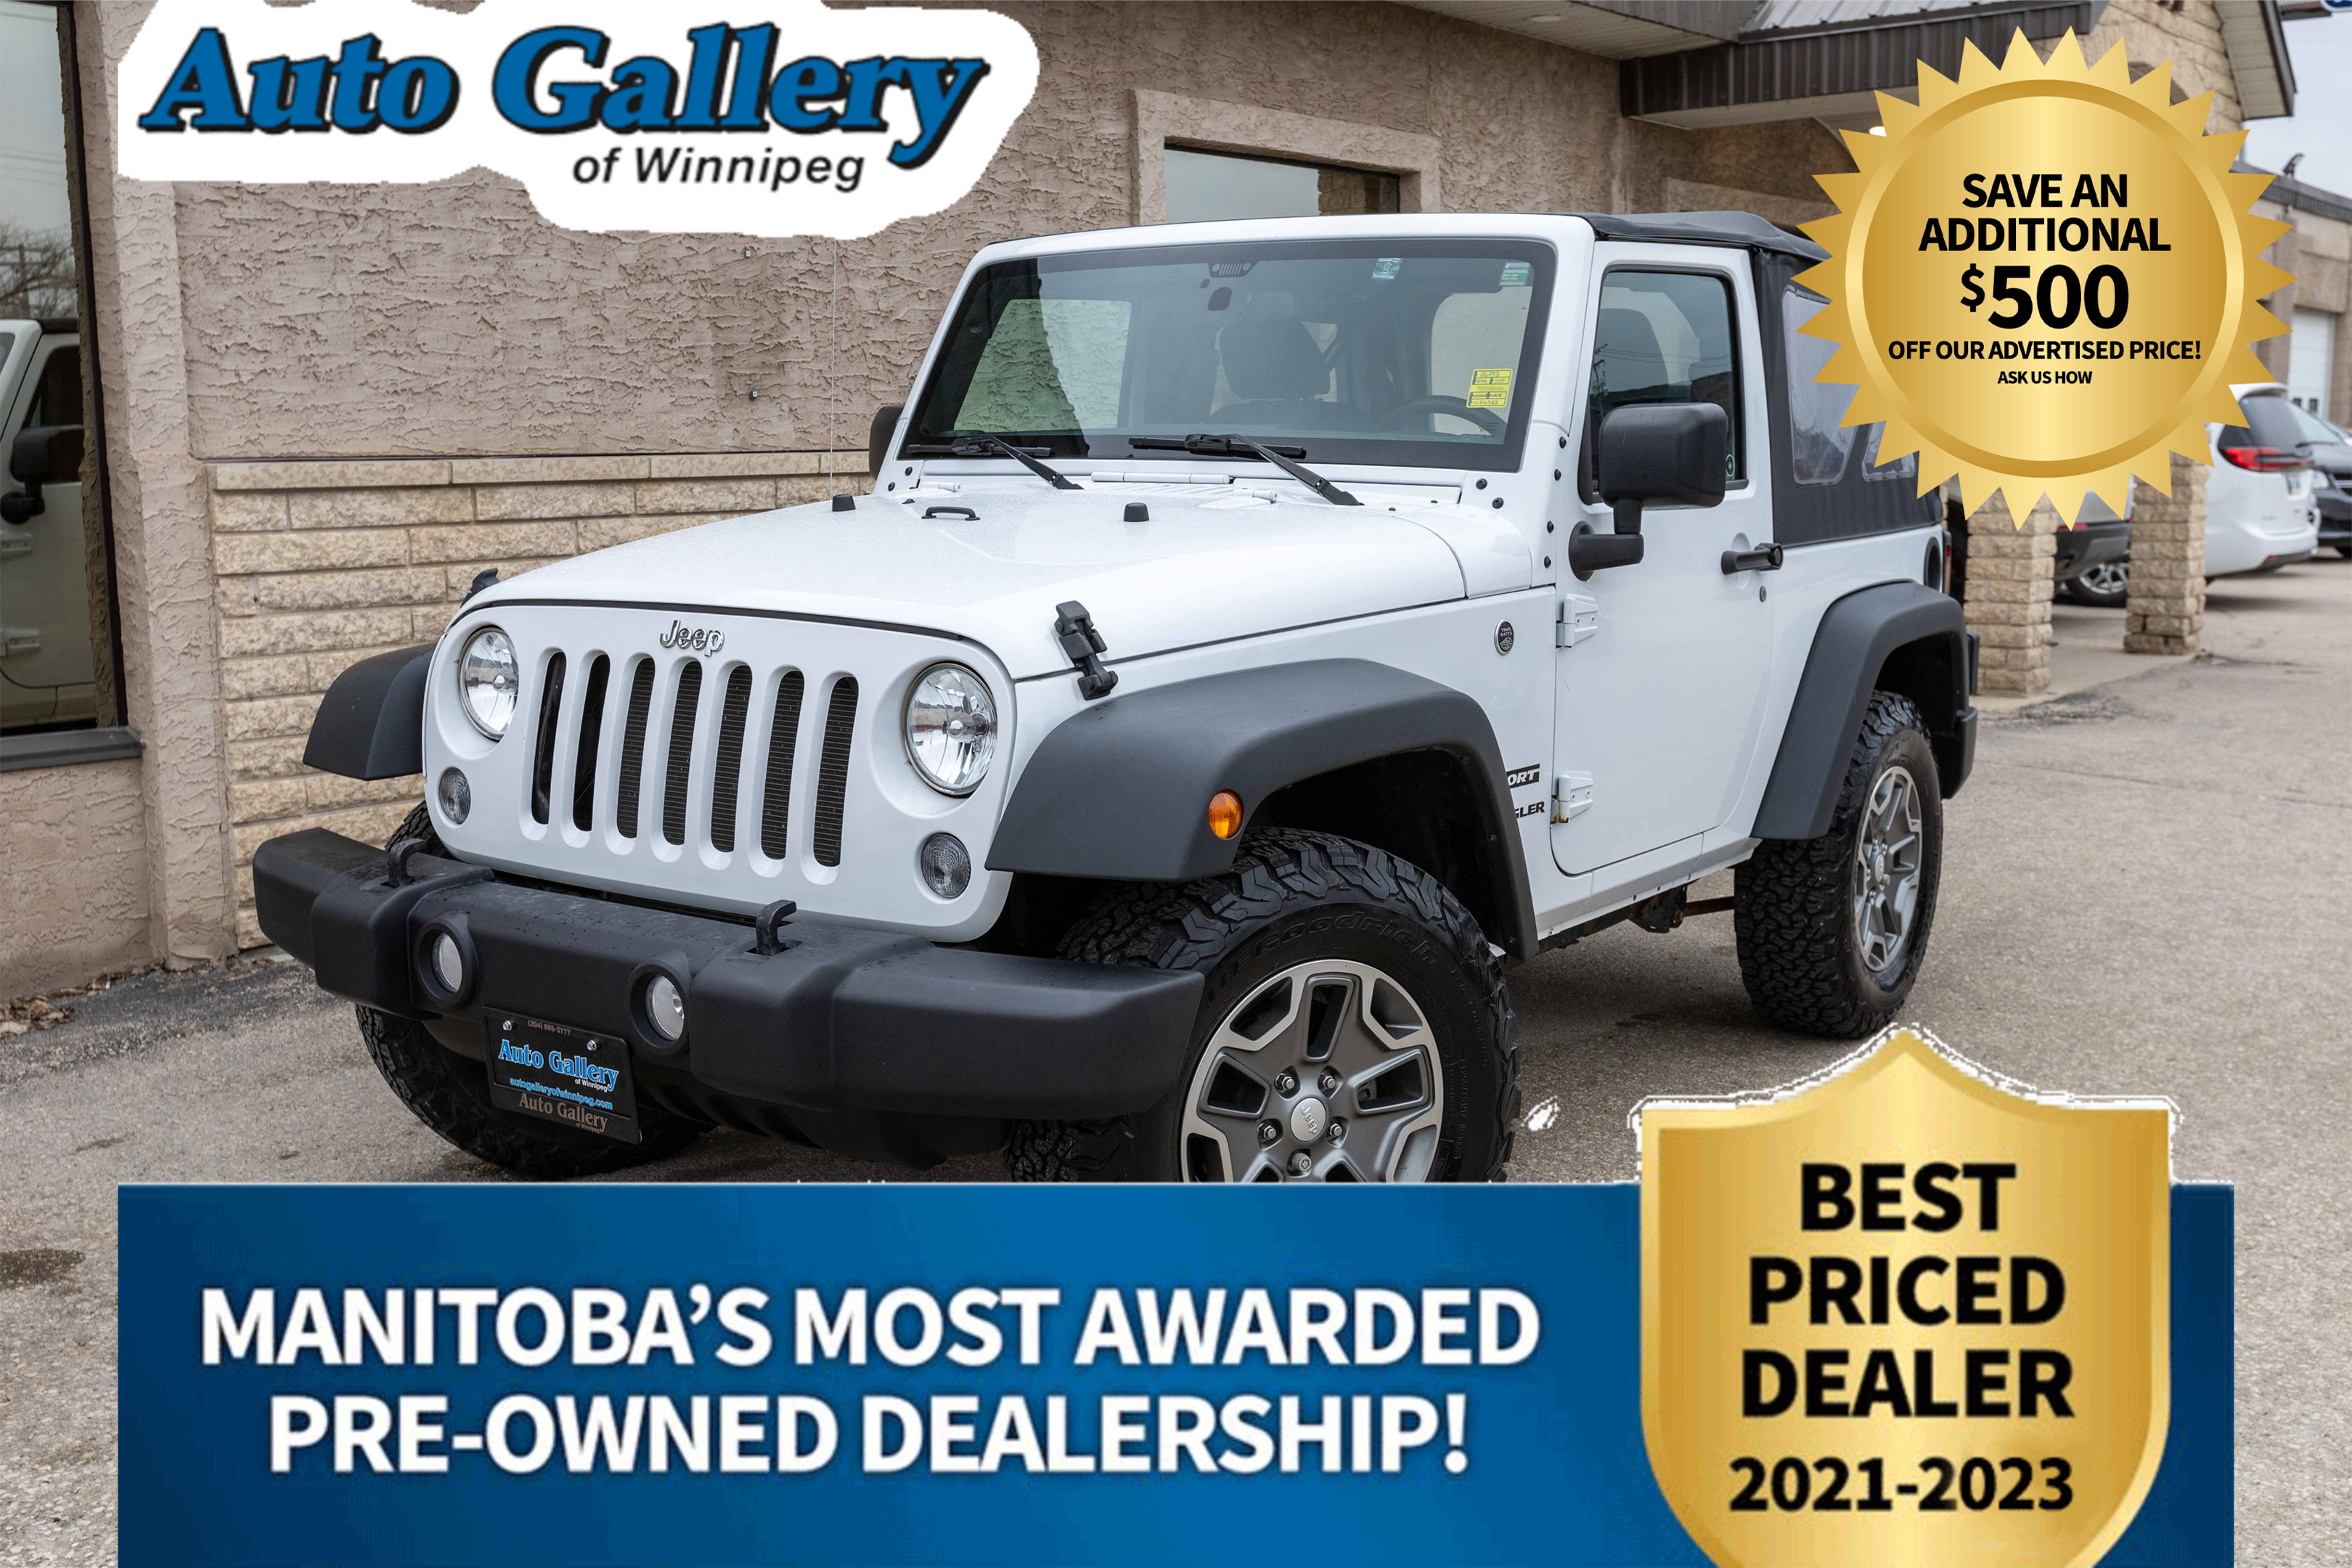 2016 Jeep Wrangler 4WD 2dr Sport, AIR CONDITIONING, MANUAL, RADIO